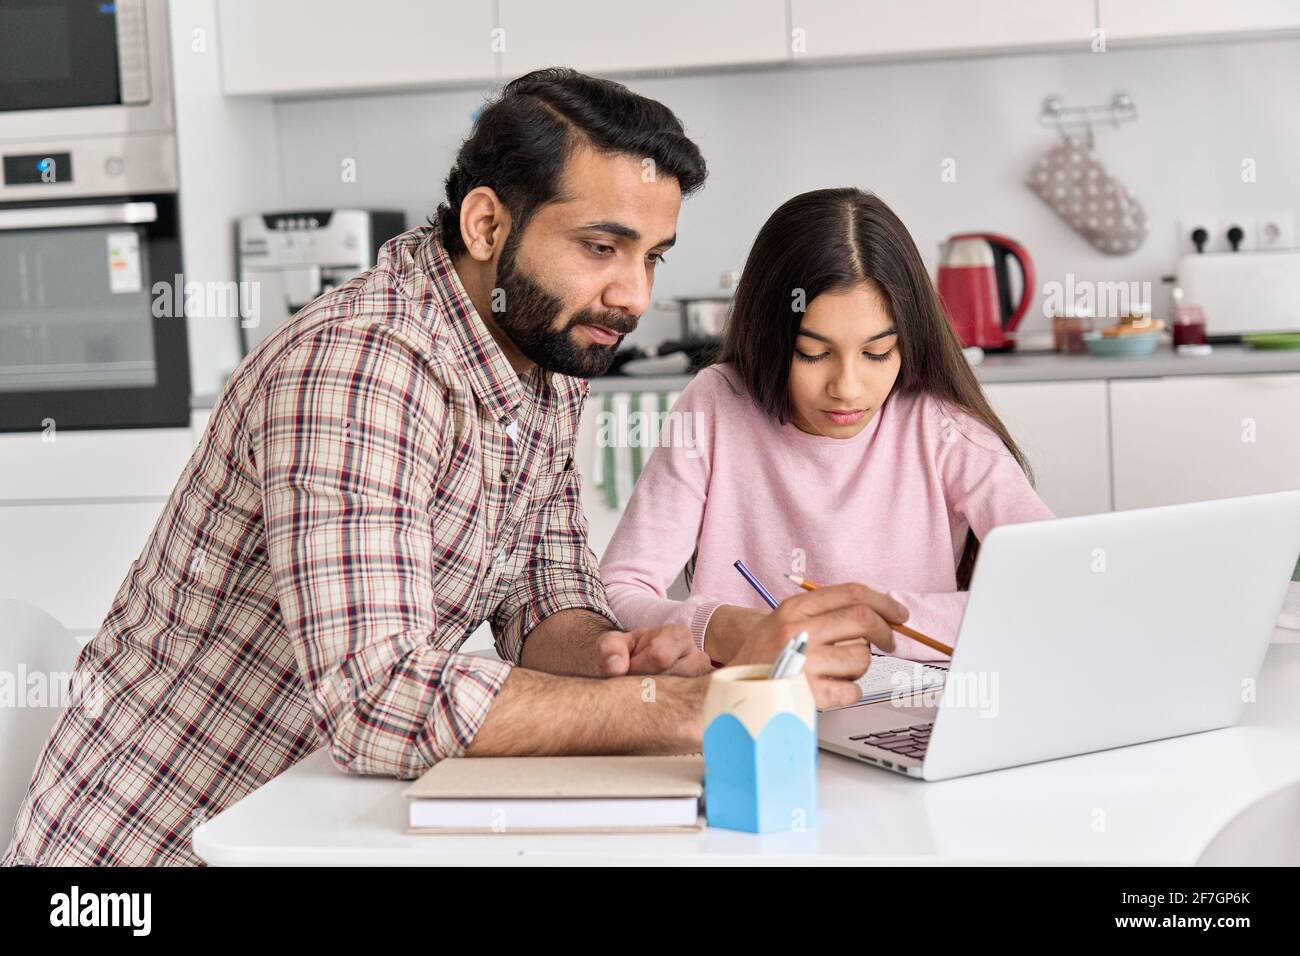 Young indian father helping school child teen daughter studying online at home. Stock Photo